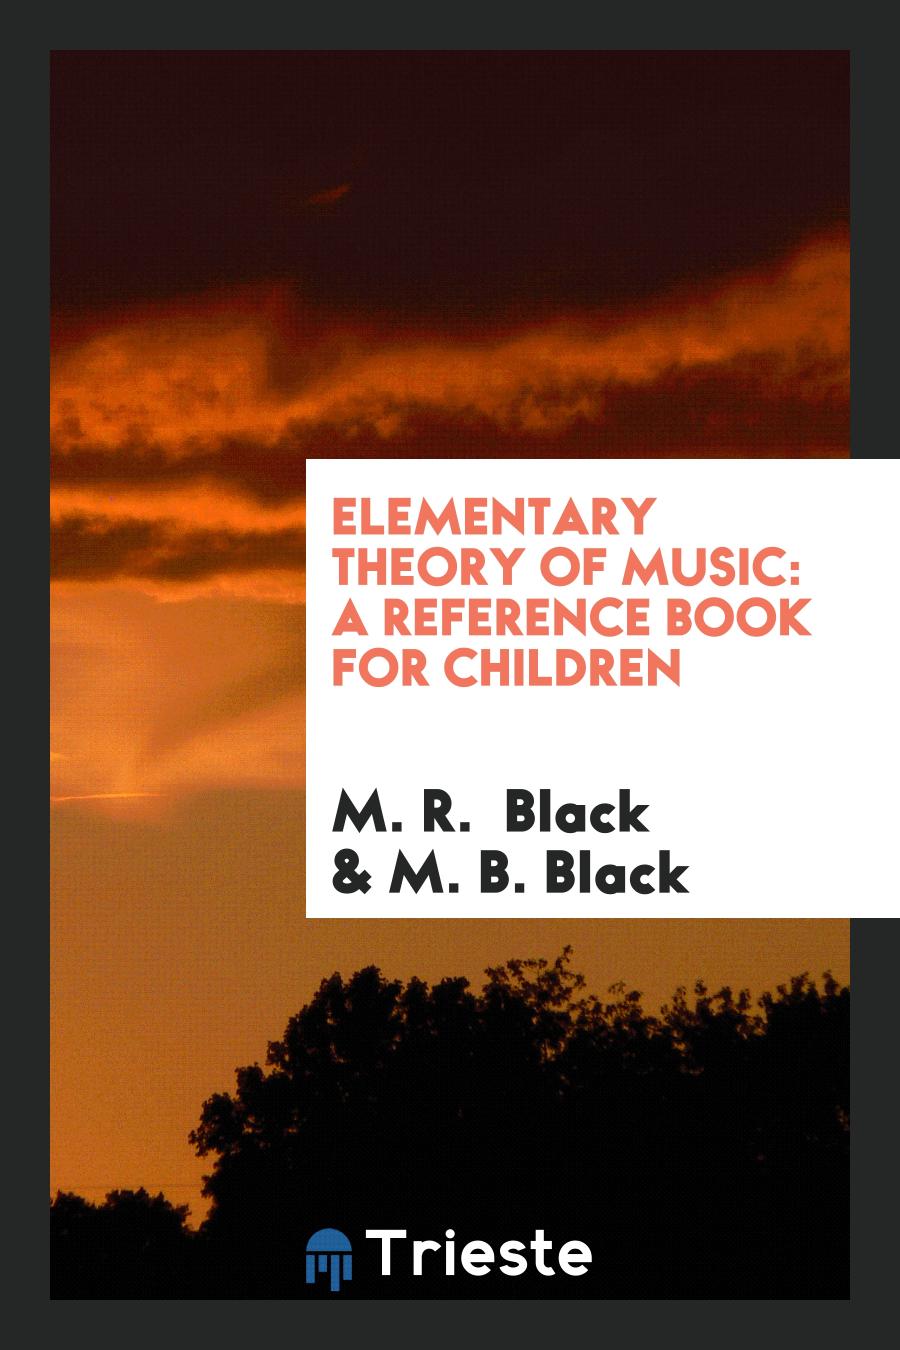 Elementary Theory of Music: A Reference Book for Children